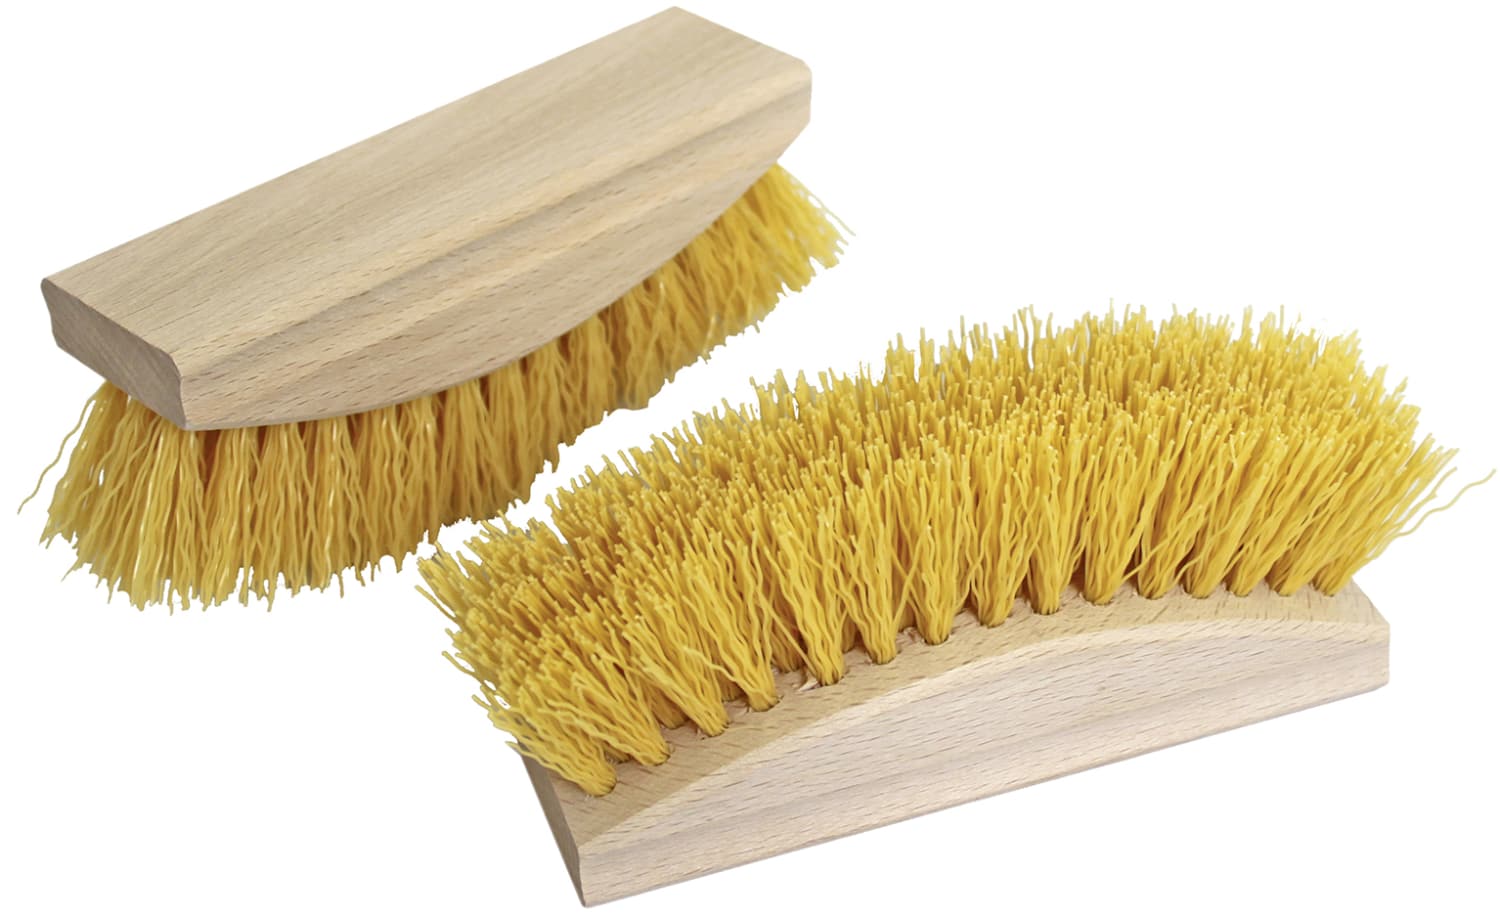 Cleaning brush for bread proofing baskets